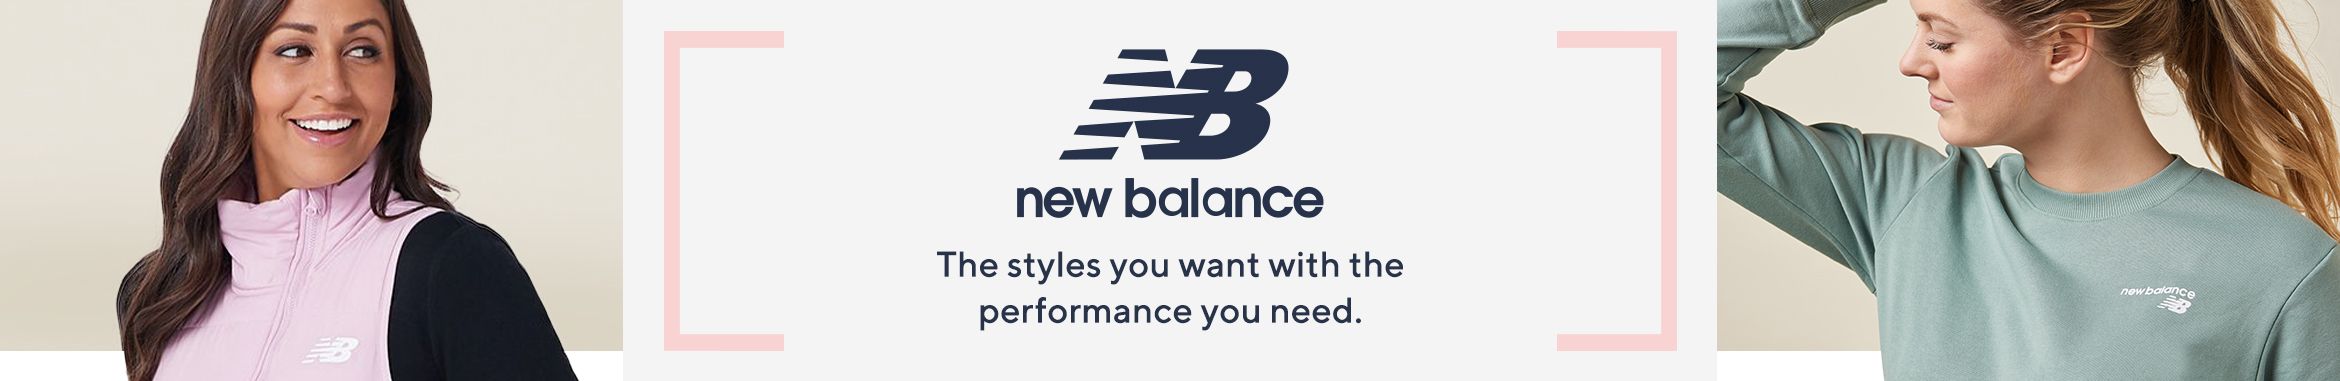 New Balance.  The styles you want with the performance you need.